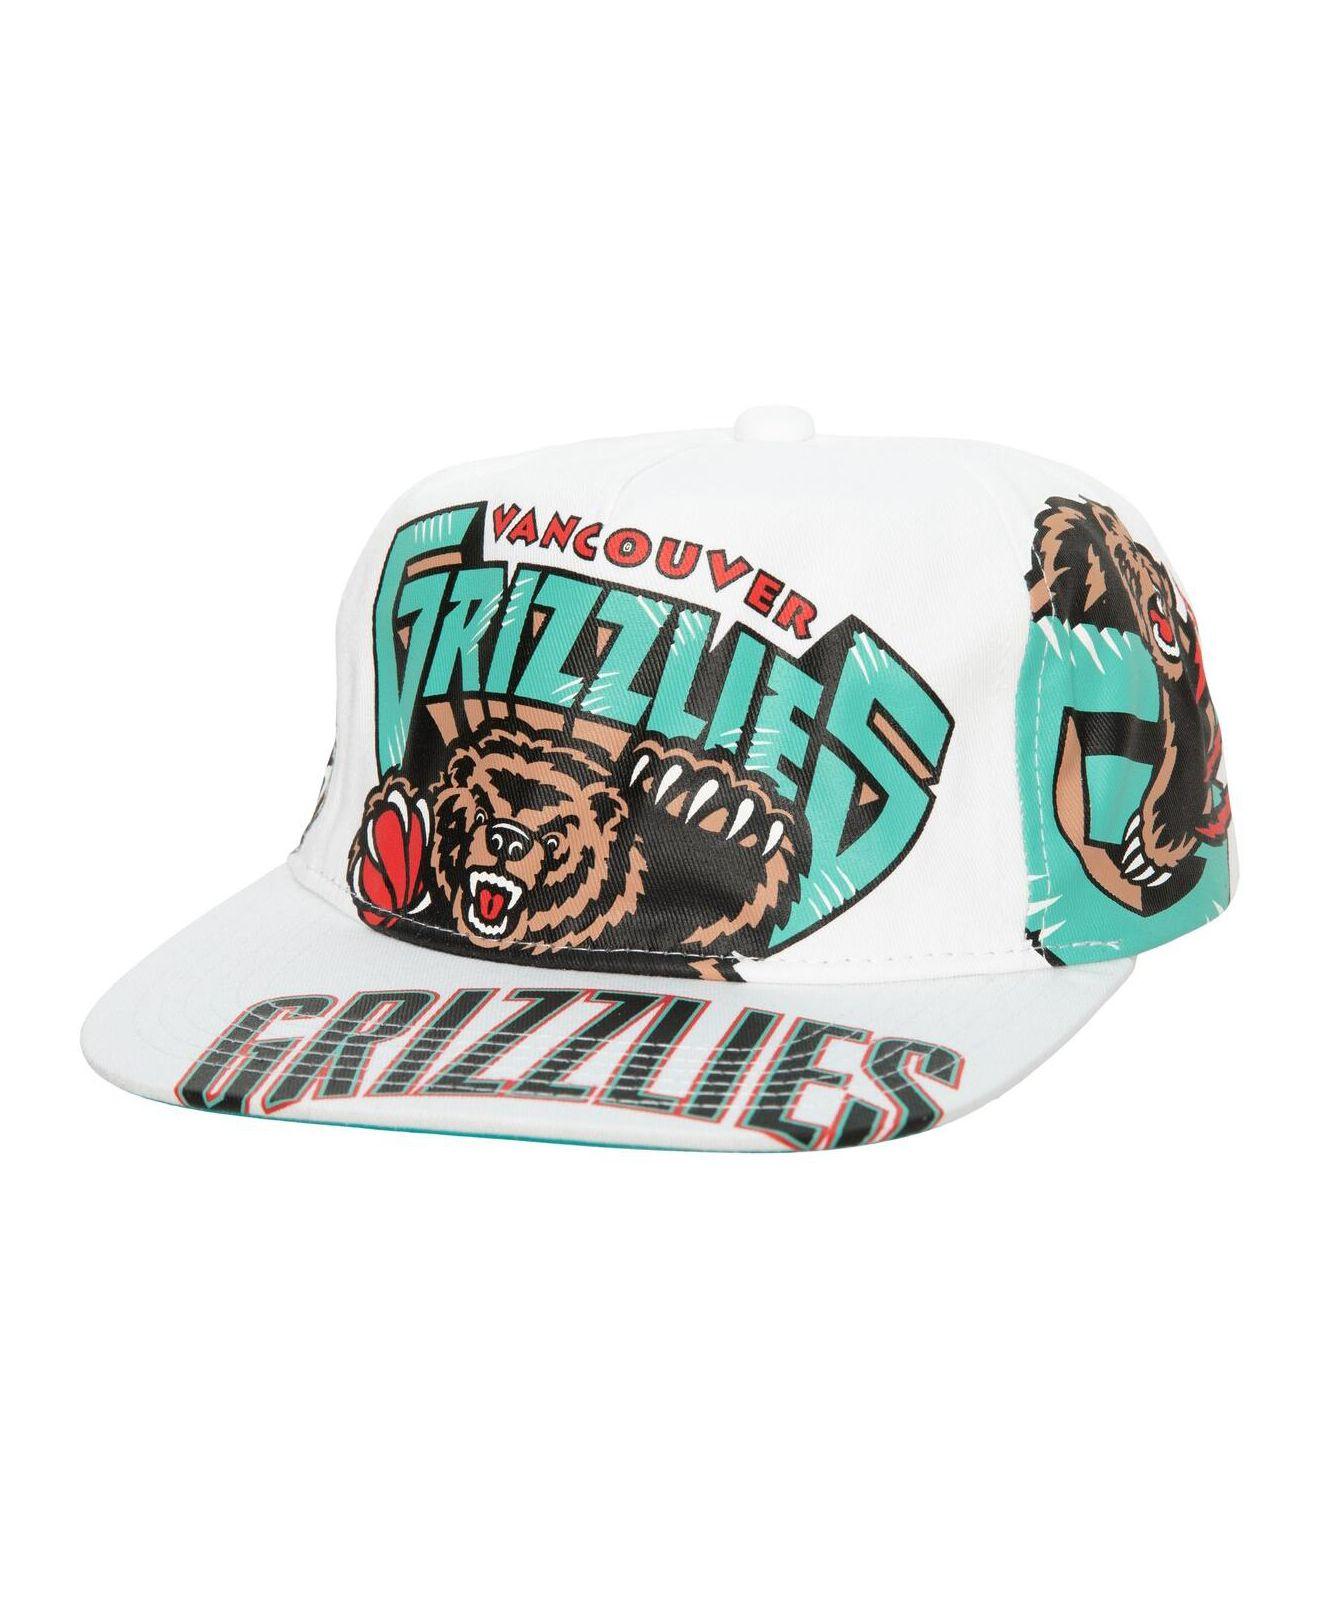 Vancouver grizzlies Mitchell and ness fitted hat